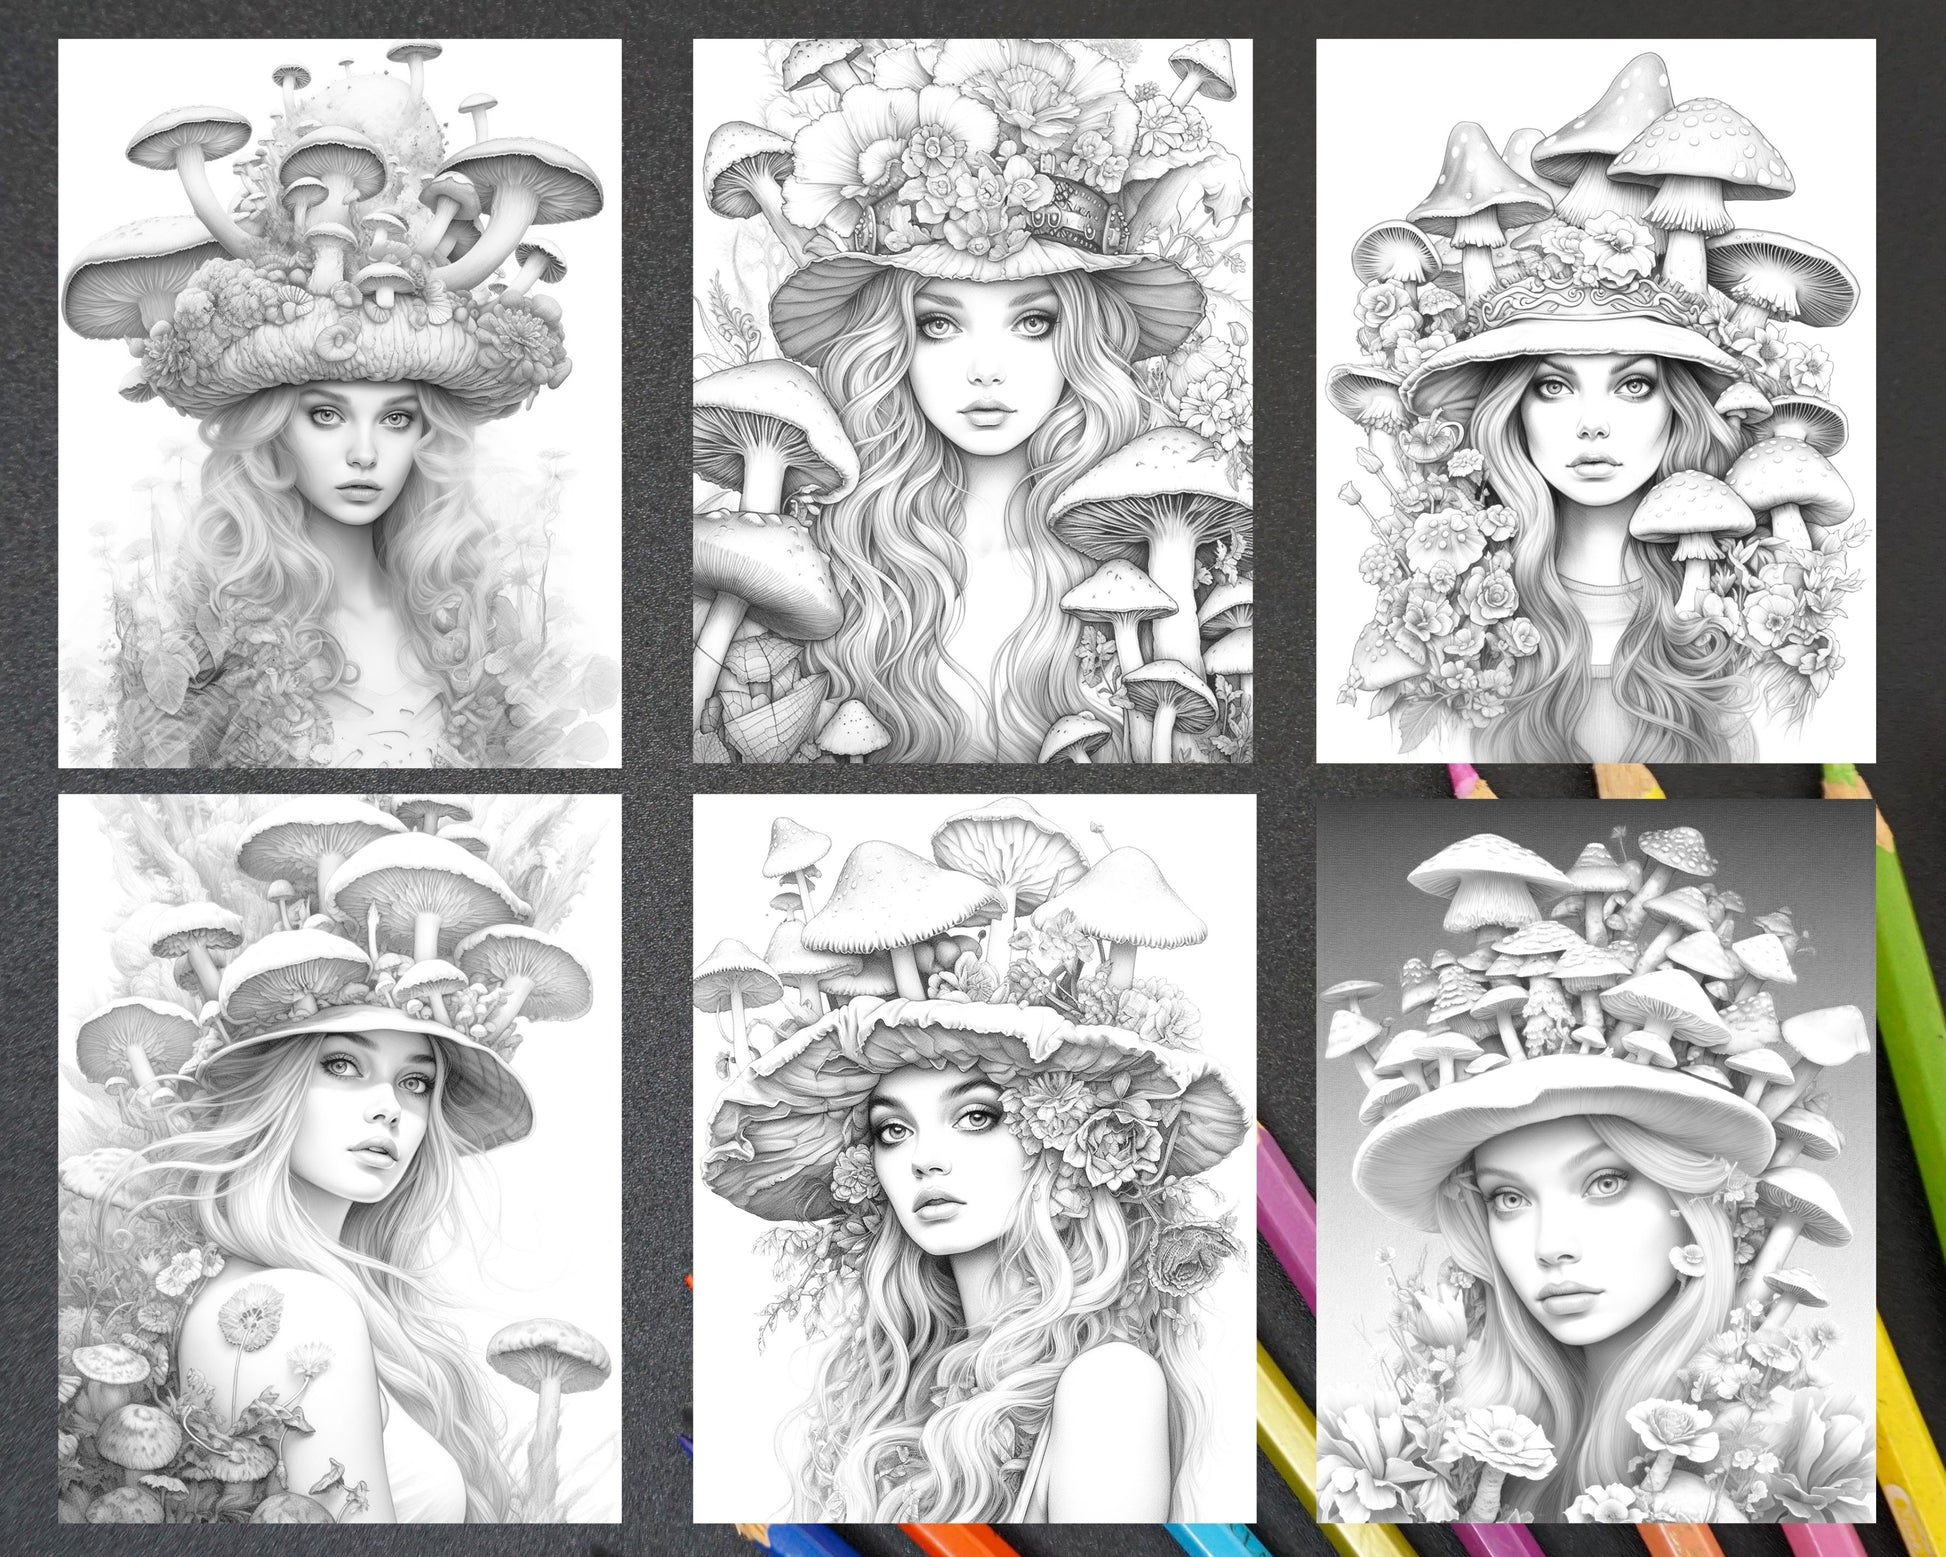 grayscale coloring pages, fairy coloring pages, mushroom art, printable coloring pages, adult coloring book